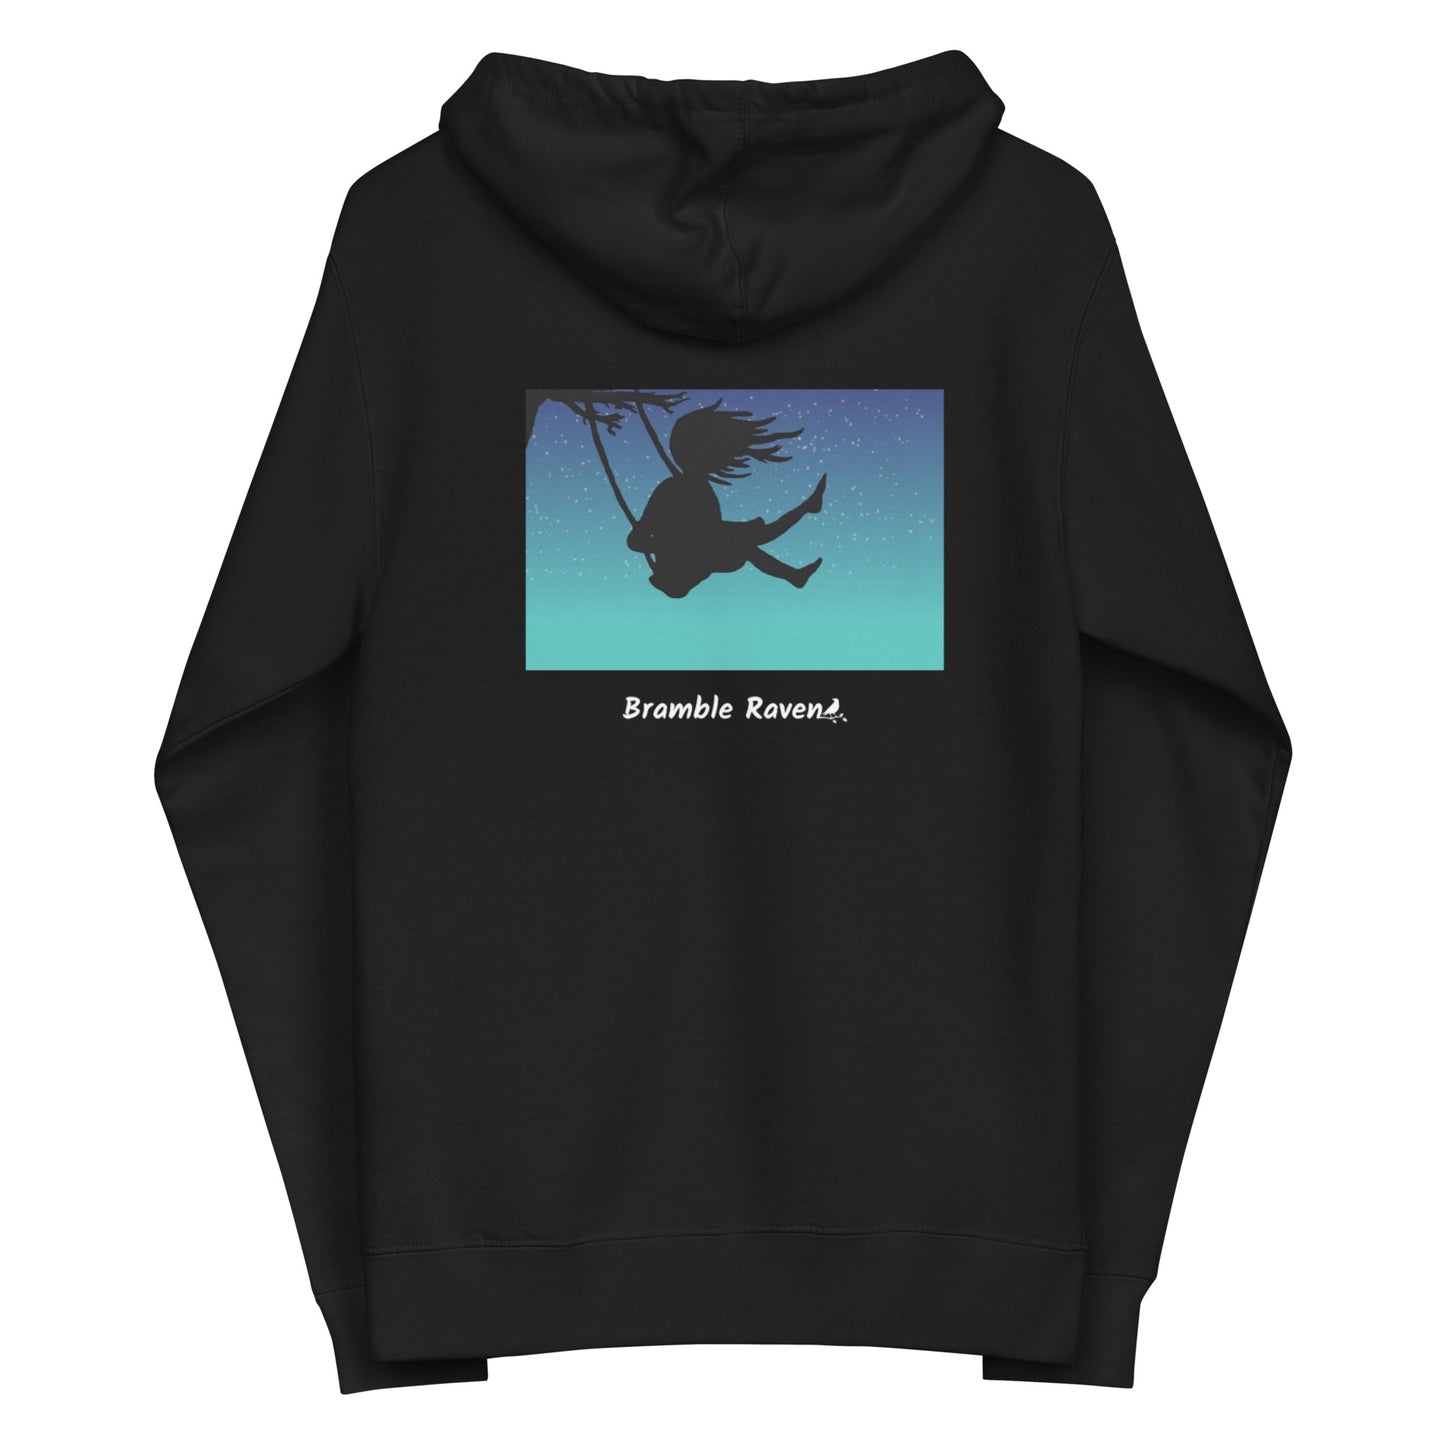 Original Swing Free design of a girl's silhouette in a tree swing against the backdrop of a blue starry sky. Rectangular image on the back of a unisex fleece-lined black colored zip up hoodie.